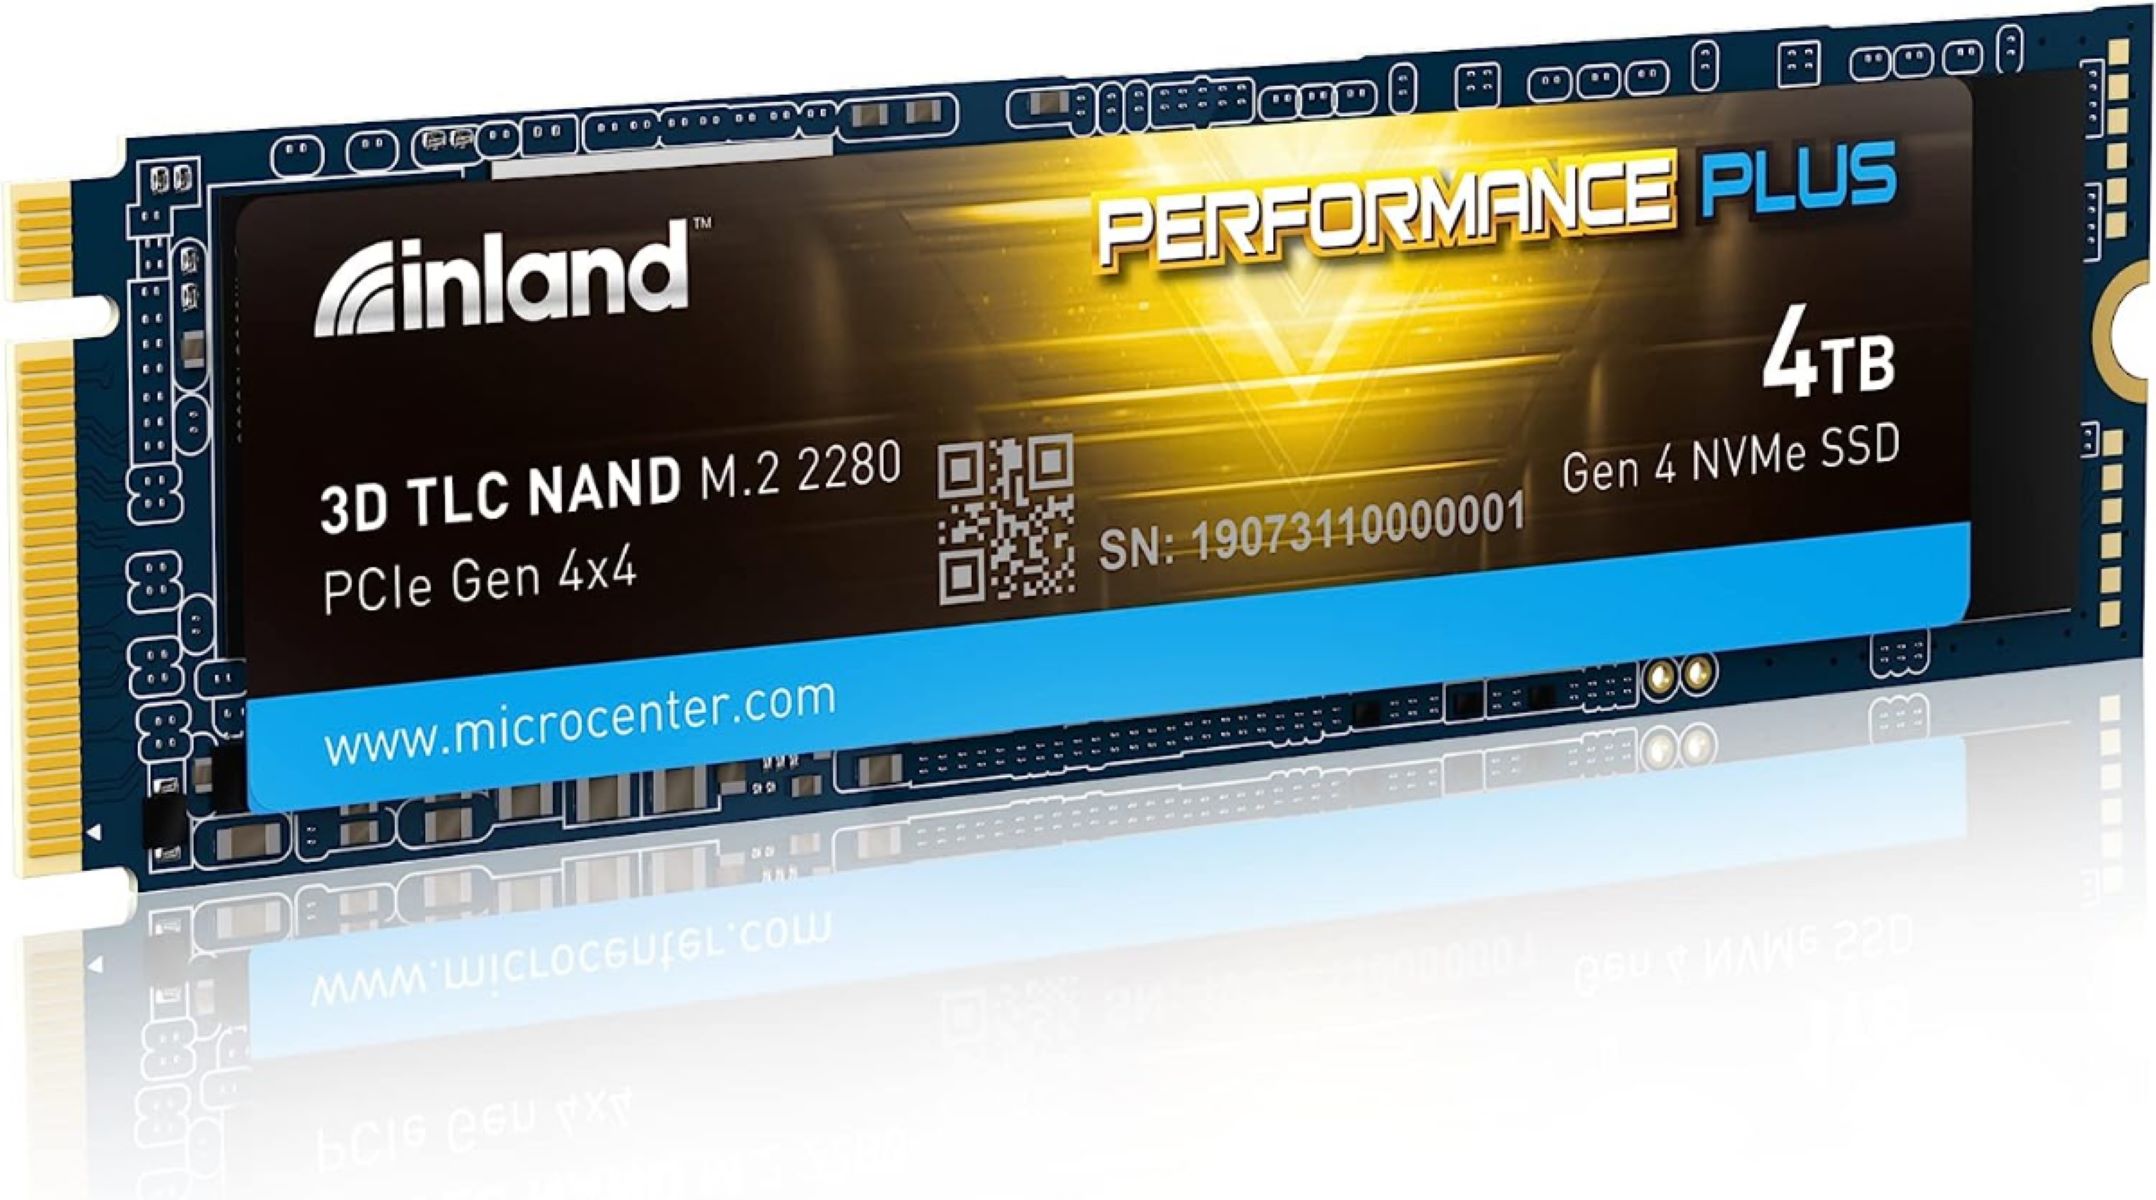 Samsung announces 990 PRO SSDs for PCIe 4.0 with big speed bump